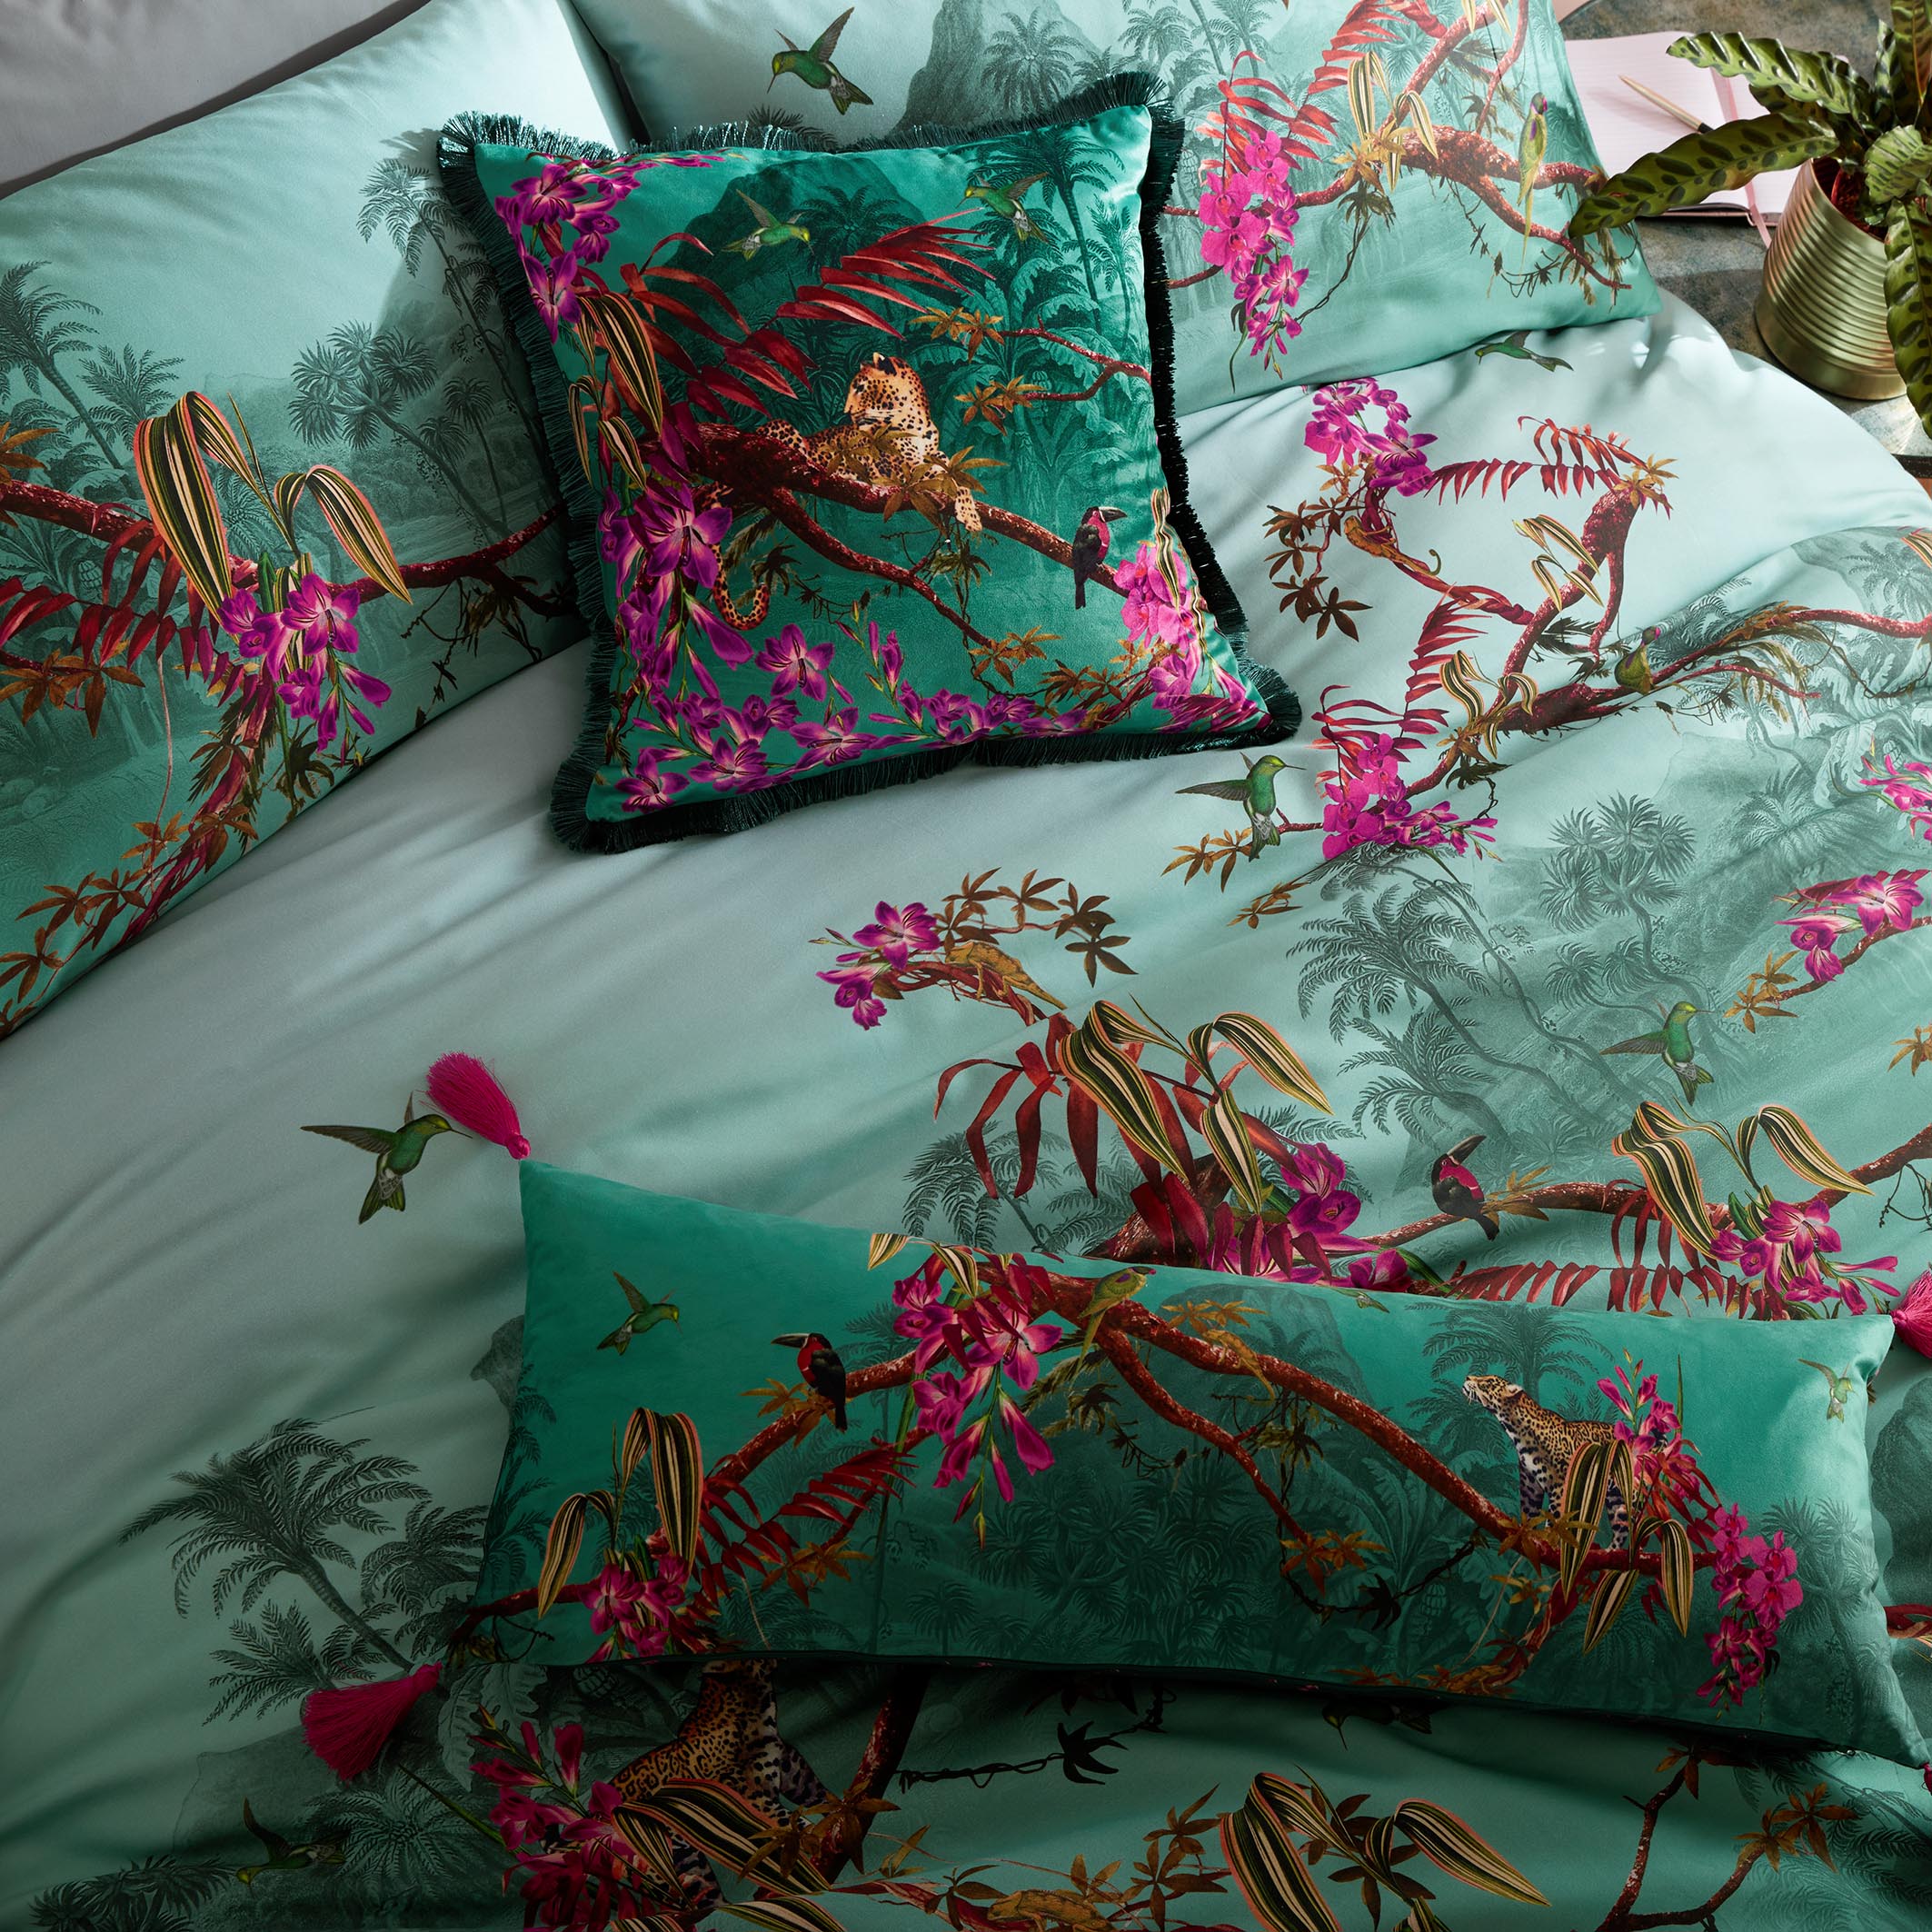 Ted Baker Bedding Hibiscus Jade Super, Is There A Bigger Duvet Than Super King